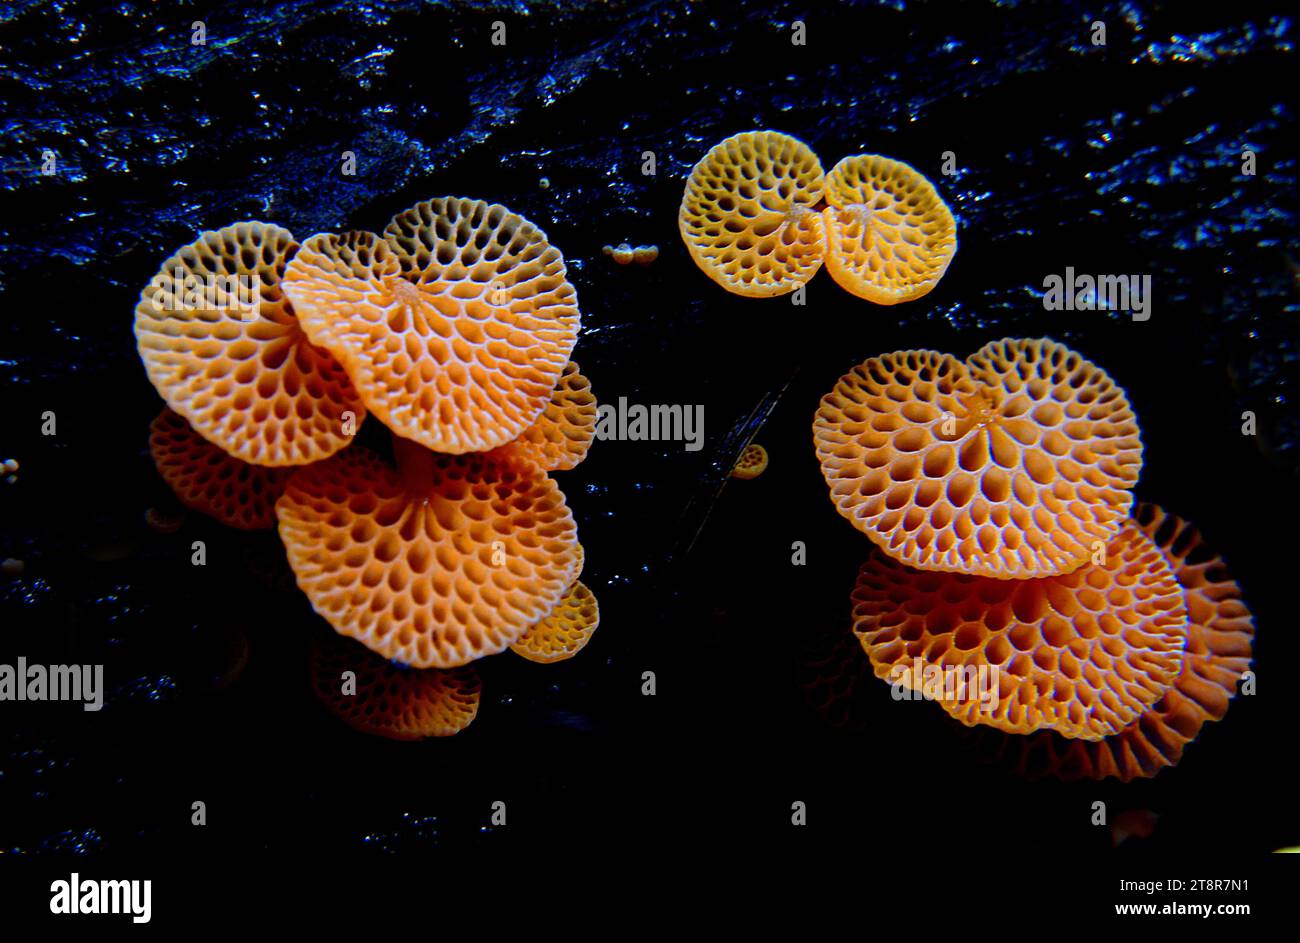 Orange pore fungus (Favolaschia calocera, Marasmiaceae), This little fungus is very bright orange in colour. It is fan shaped like a ping pong bat, with a short stem (up to 20 mm long), attached to the side of the cap and to logs or dead branches. Instead of gills it has large pores giving it a honeycombed appearance. The pores are visible through the thin flesh. The fungus is 5-40 mm diameter Stock Photo